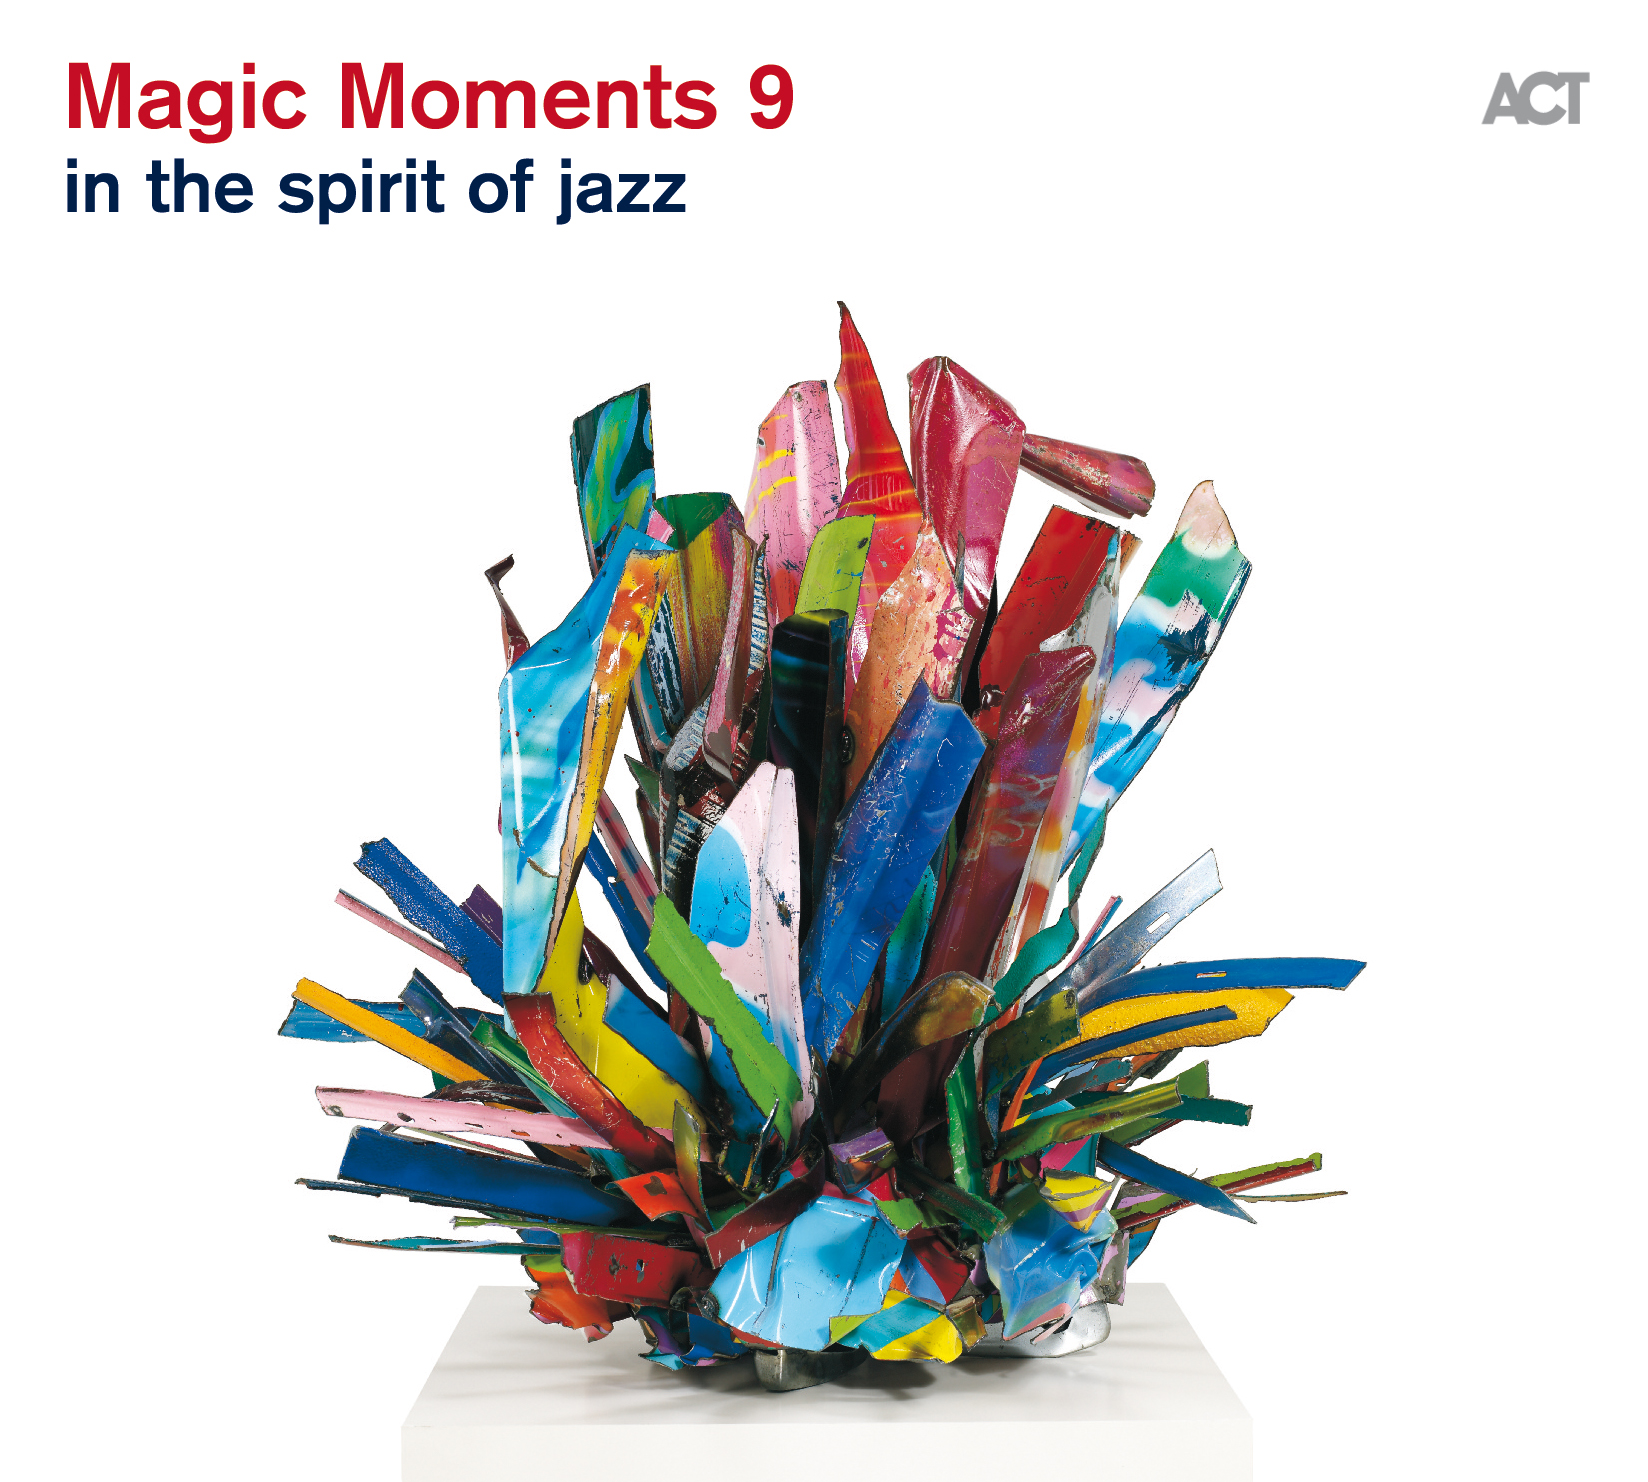 Magic Moments 9 "In The Spirit of Jazz"